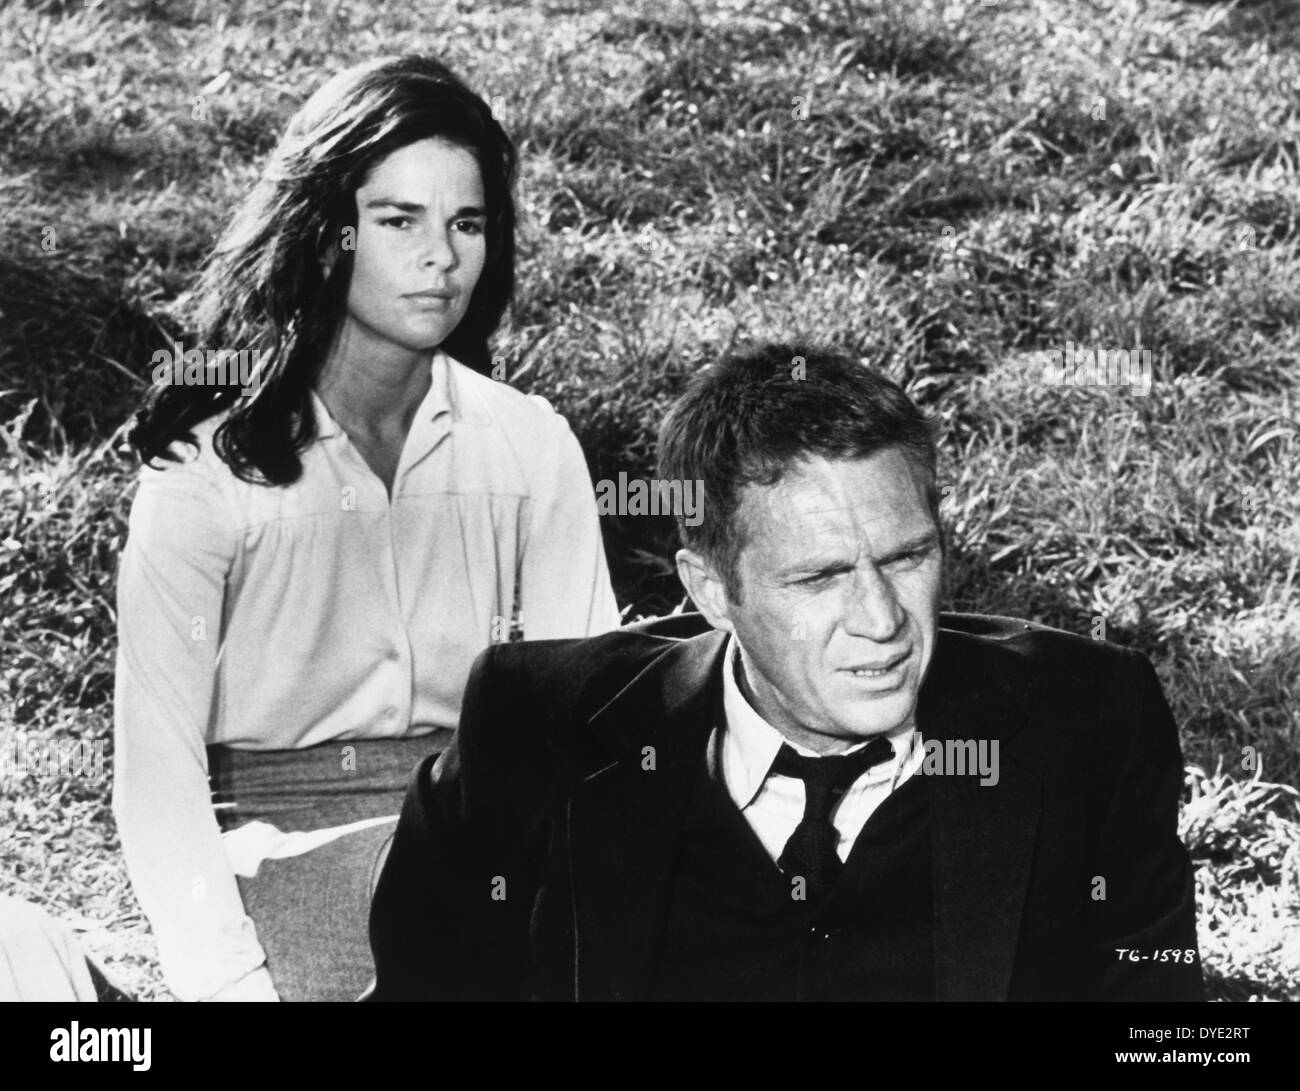 Ali MacGraw and Steve McQueen, on-set of the Film, "The Getaway", 1972 Stock Photo